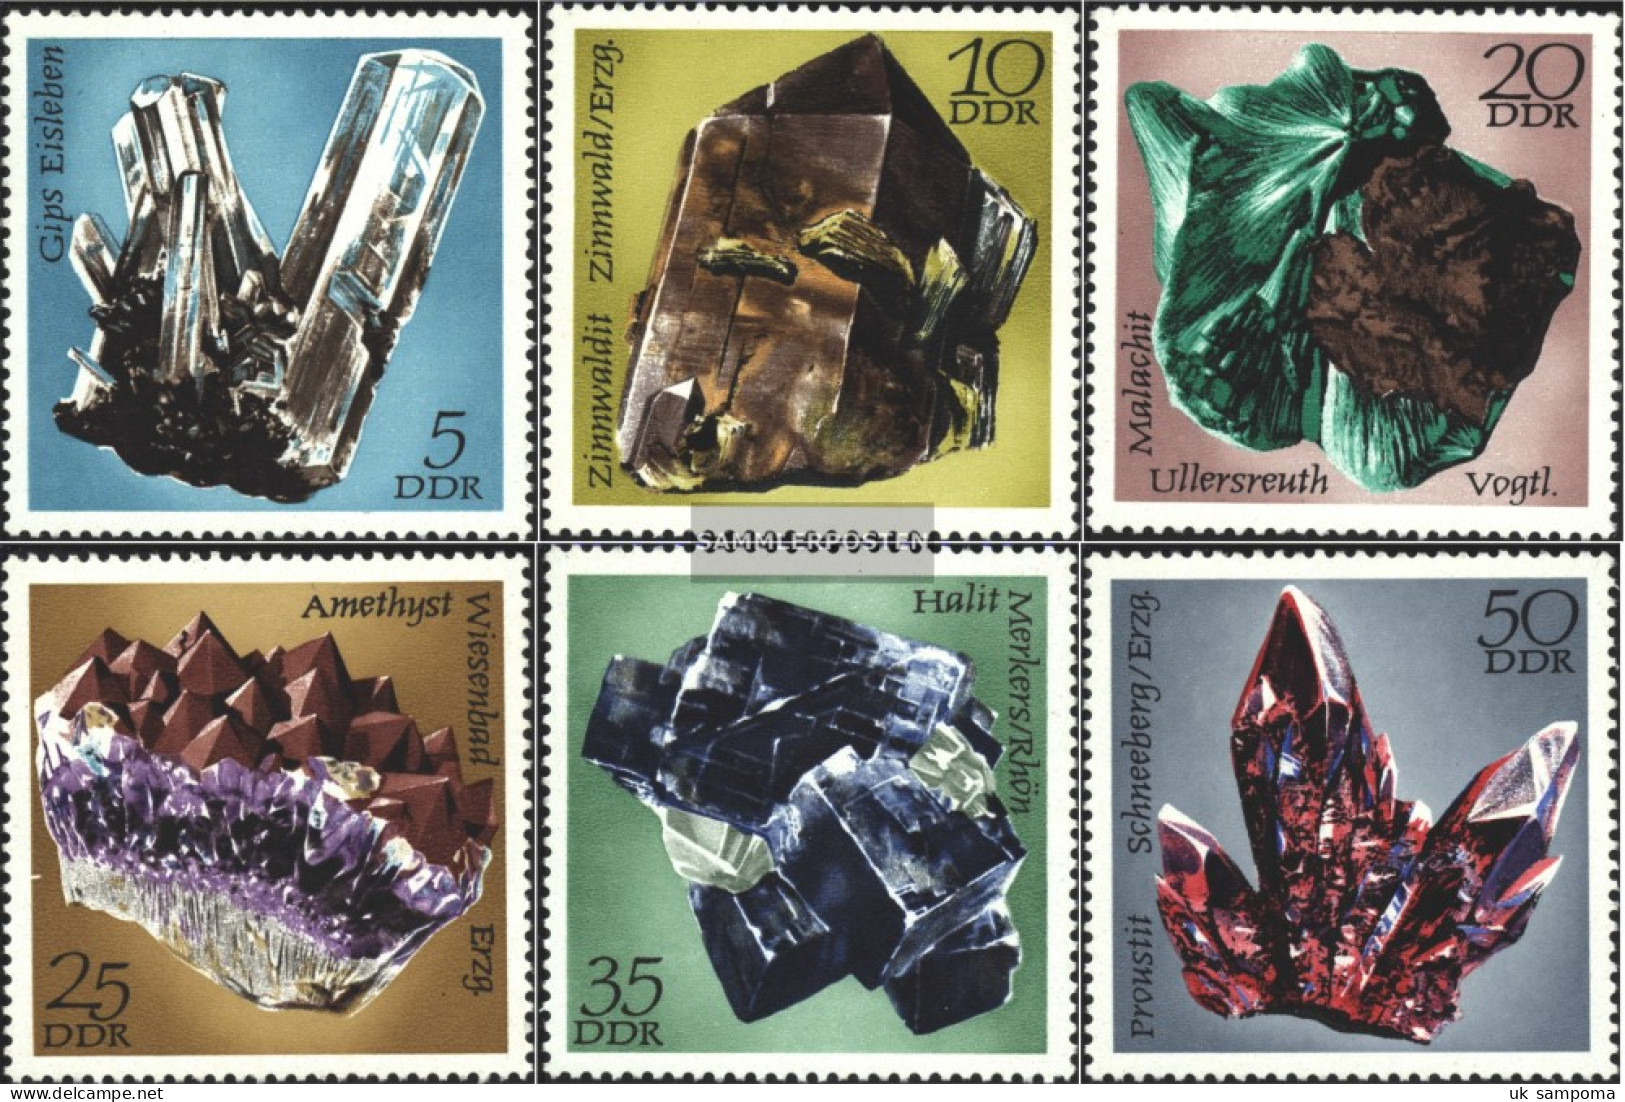 DDR 1737-1742 (complete.issue) Unmounted Mint / Never Hinged 1972 Mineral Discoveries - Ungebraucht